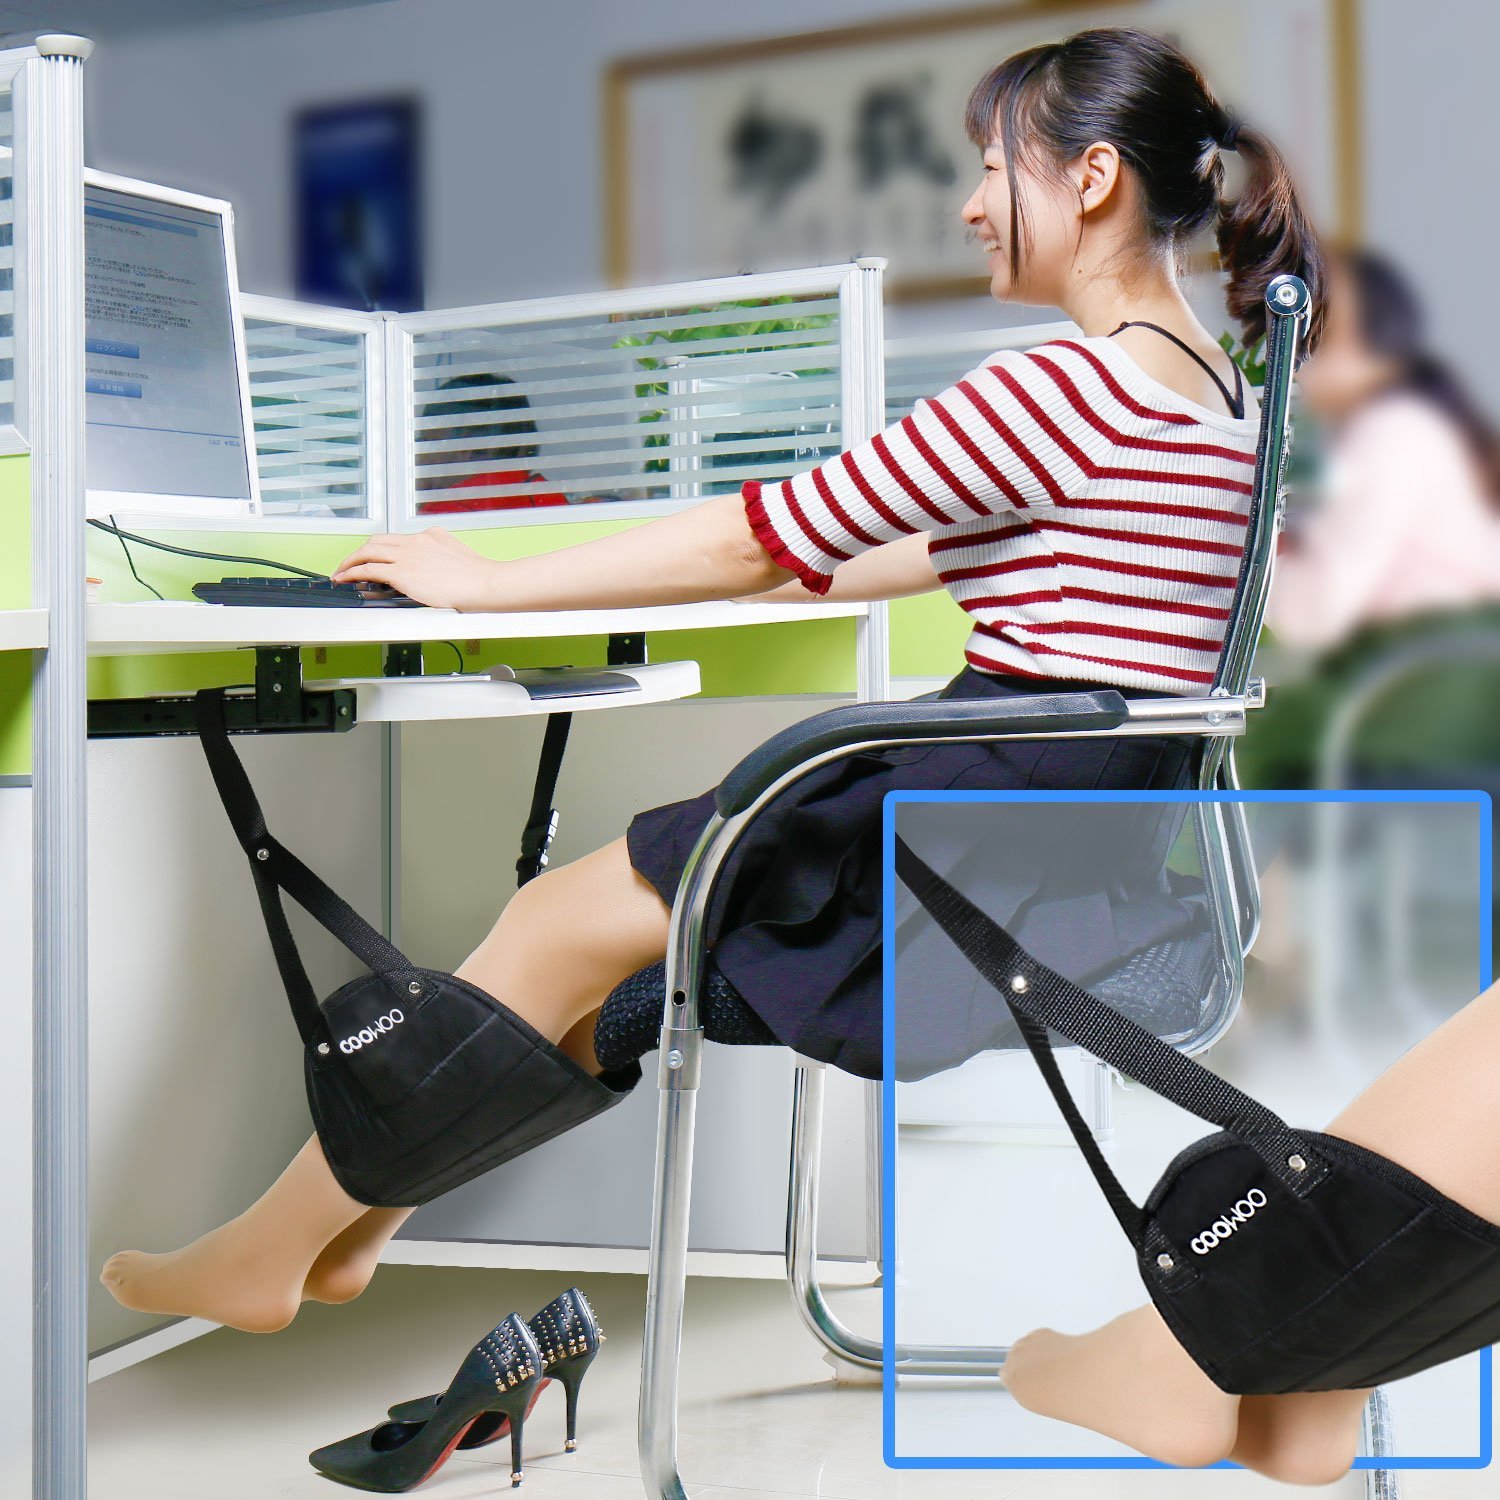 COOWOO Foot Rest, Portable Folding Travel Footrest Relaxation and Comfortable Flight Carry-on Foot Rest Adjustable Office Foot Rest, Prevent Swelling and Soreness Foot Hammock Black